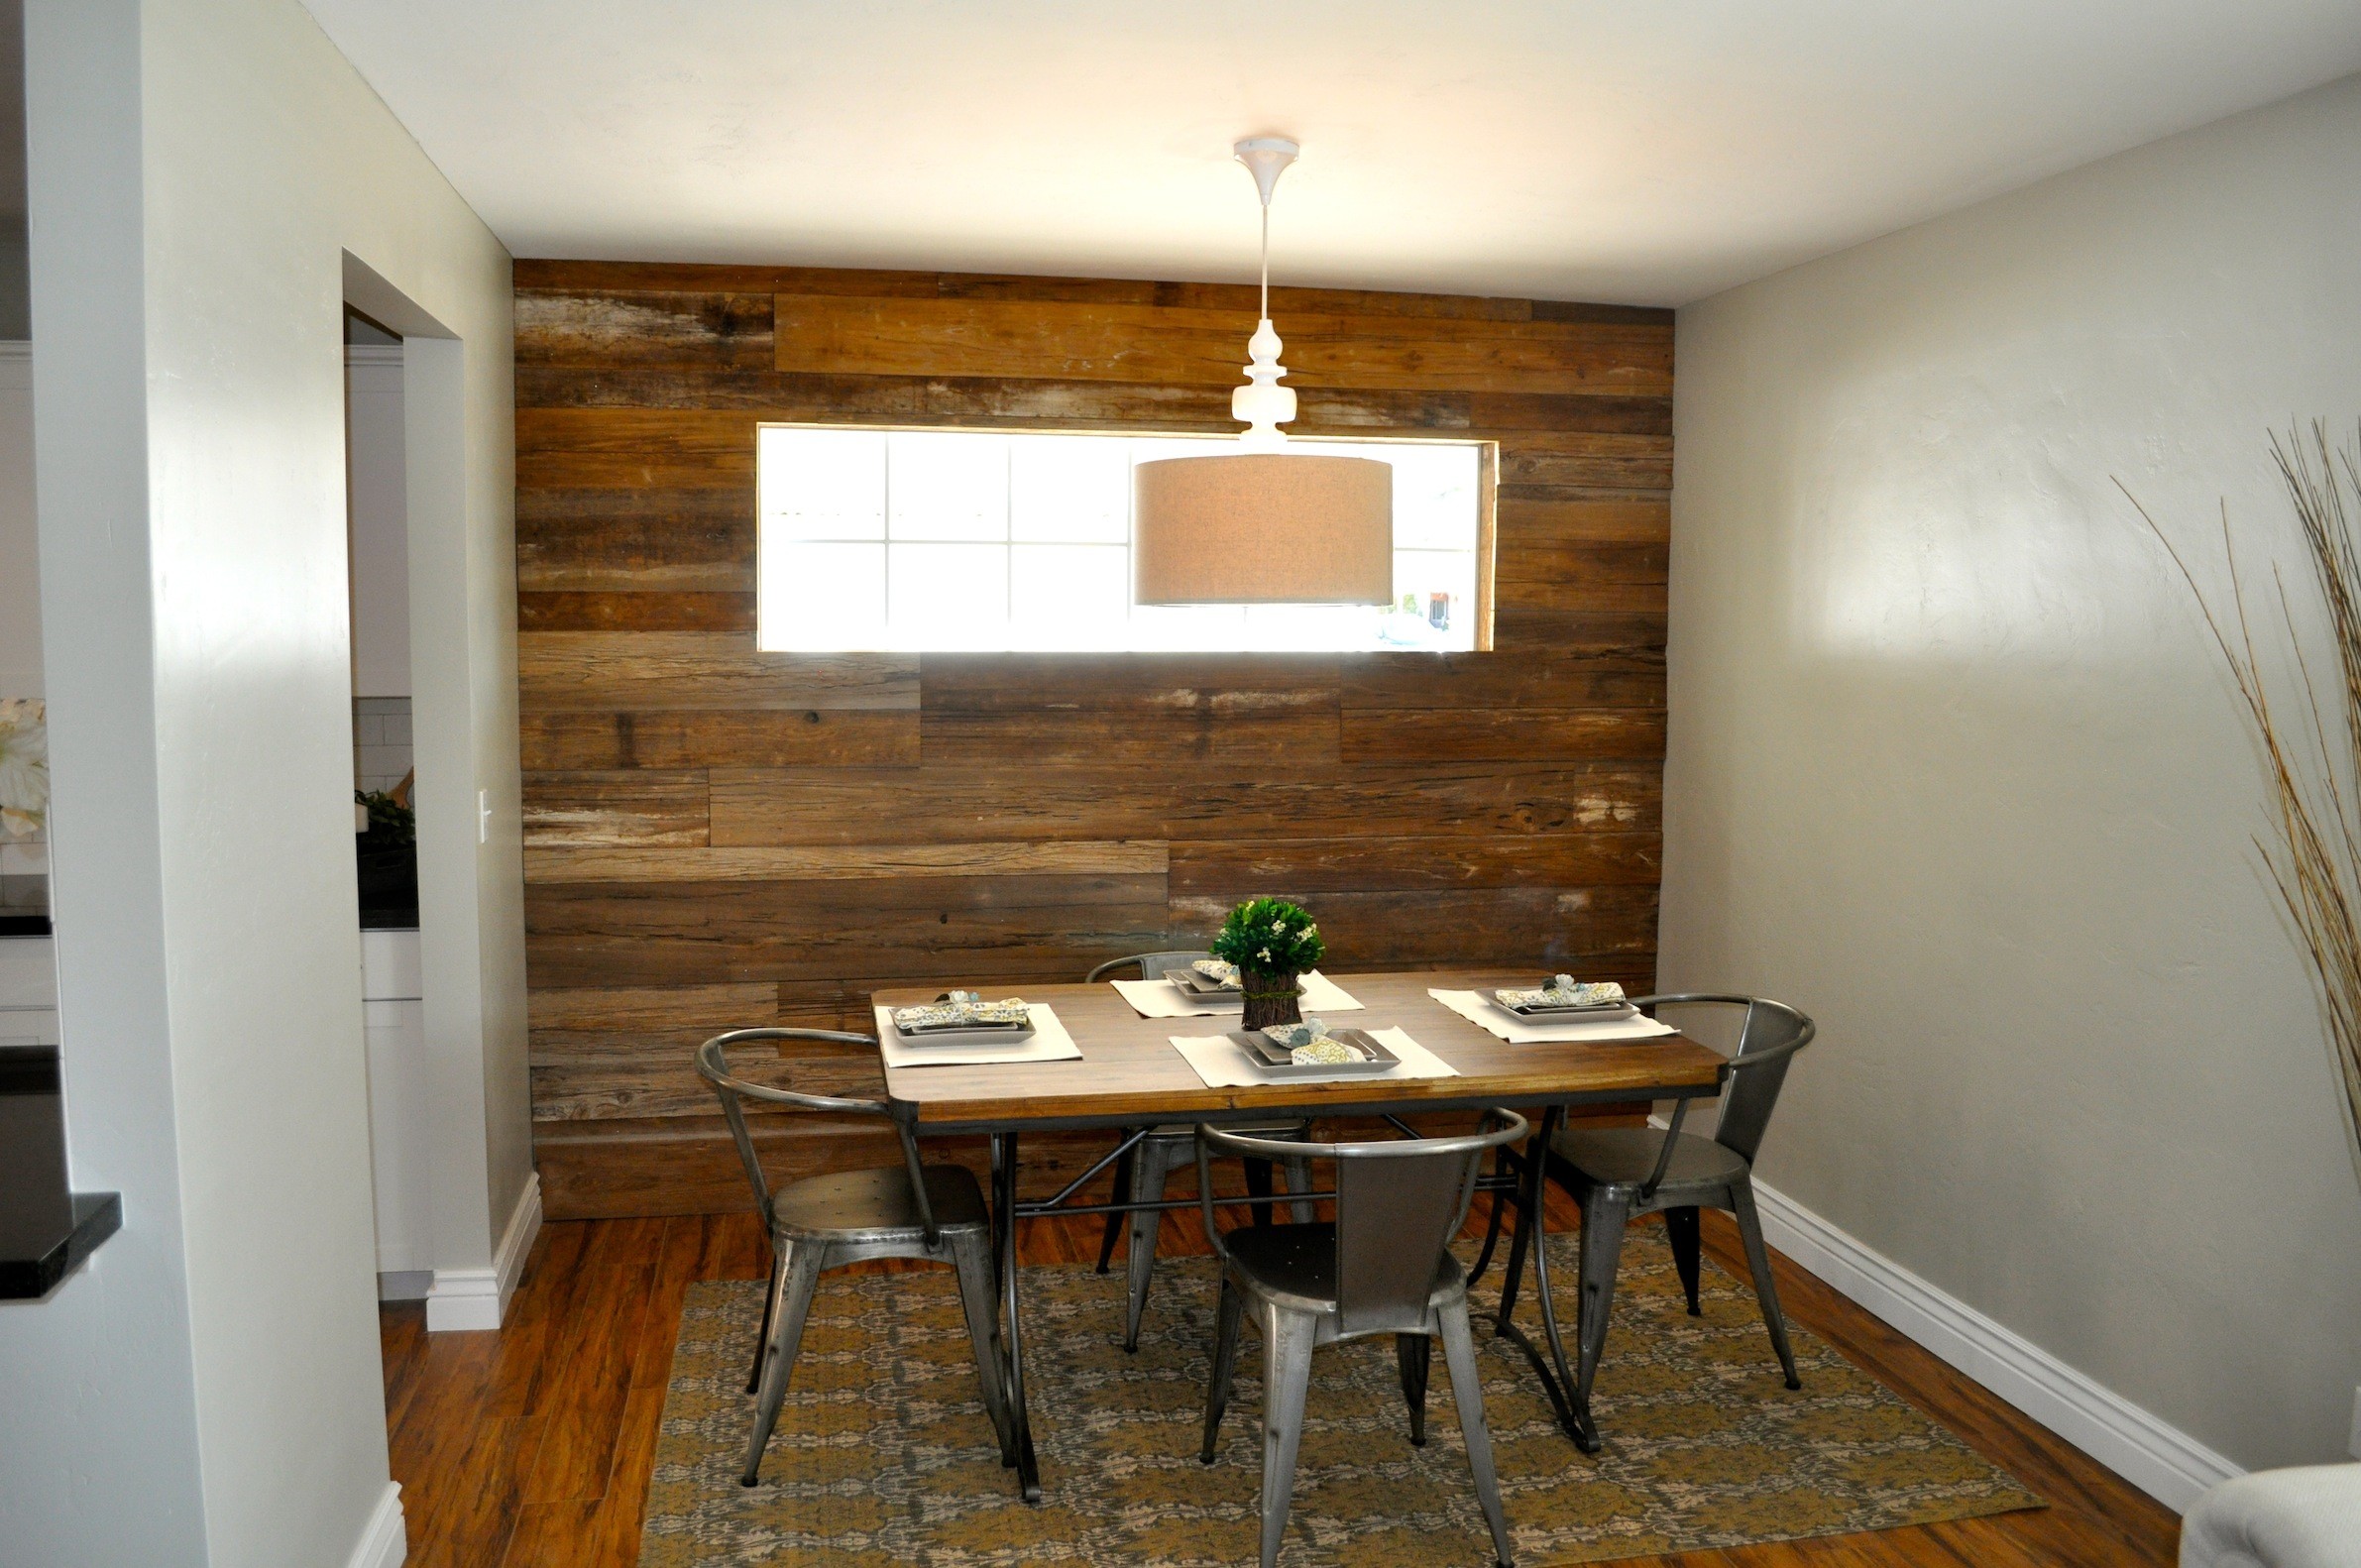 2382x1582 Barn wood accent wall - by Rafterhouse.